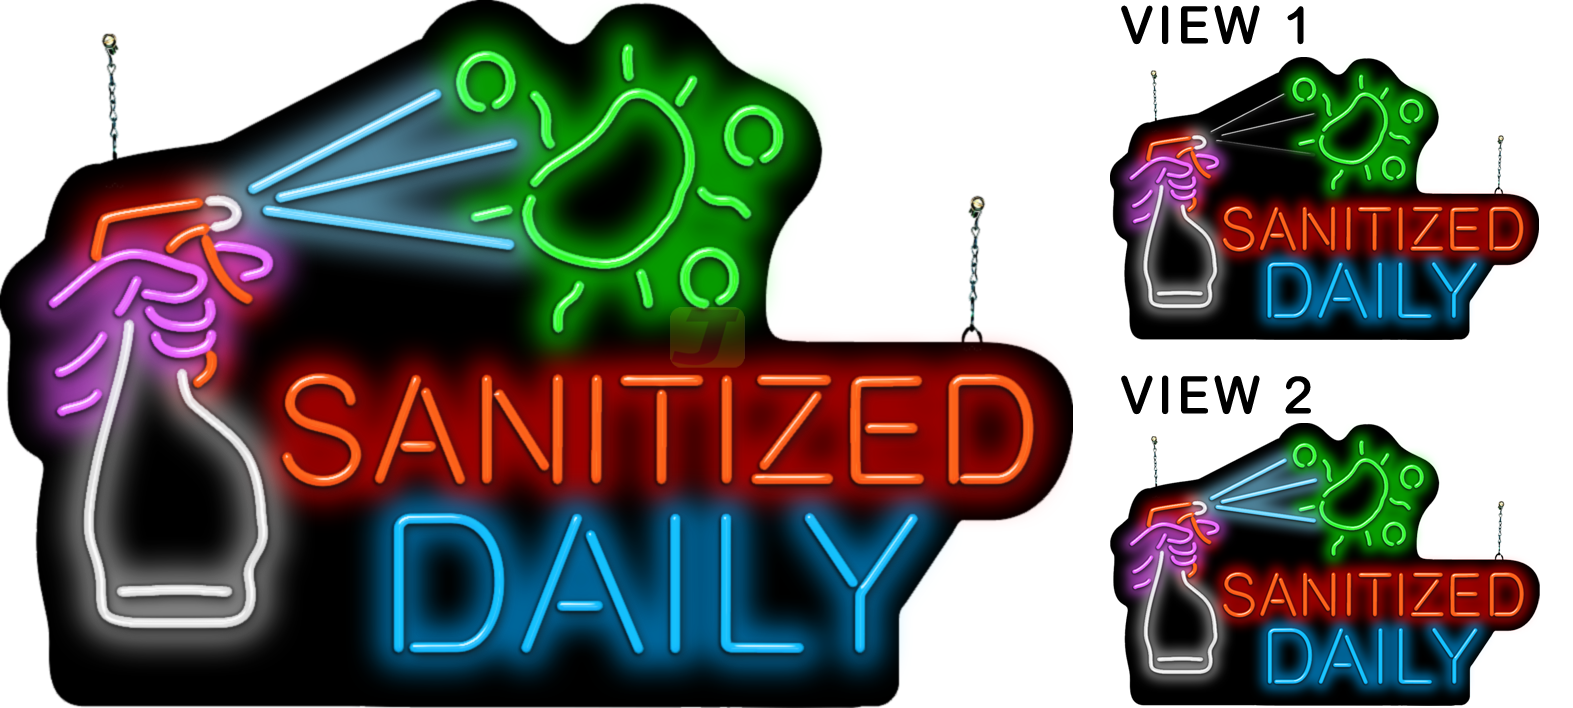 Animated Sanitized Daily with Graphics Neon Sign